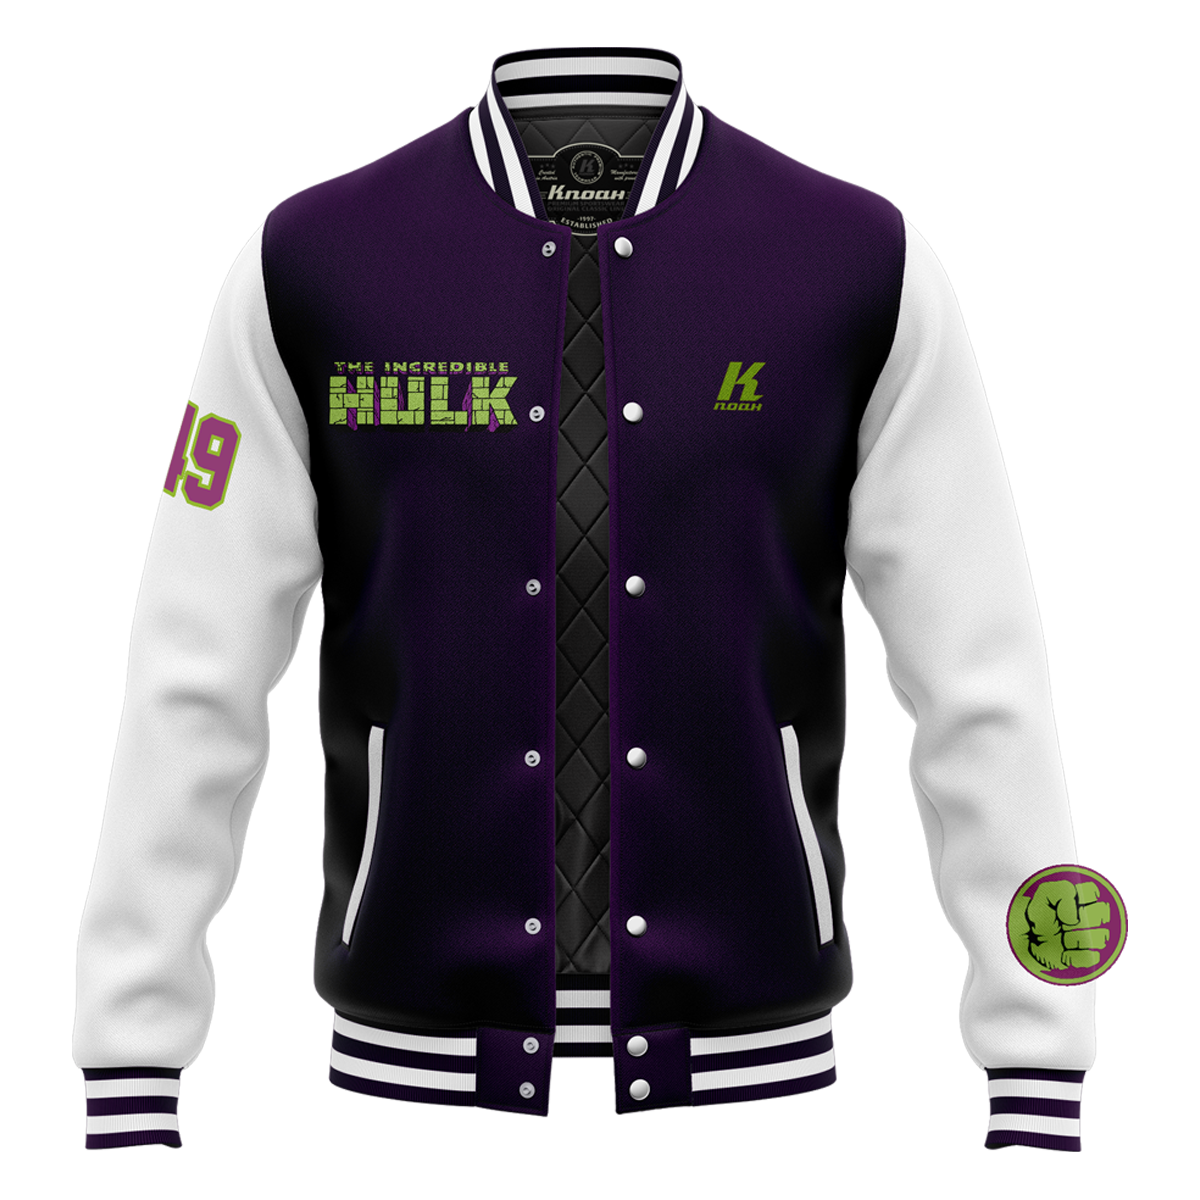 Day 3: "Hulk" Authentic Varsity Jacket with Playernumber/Initials